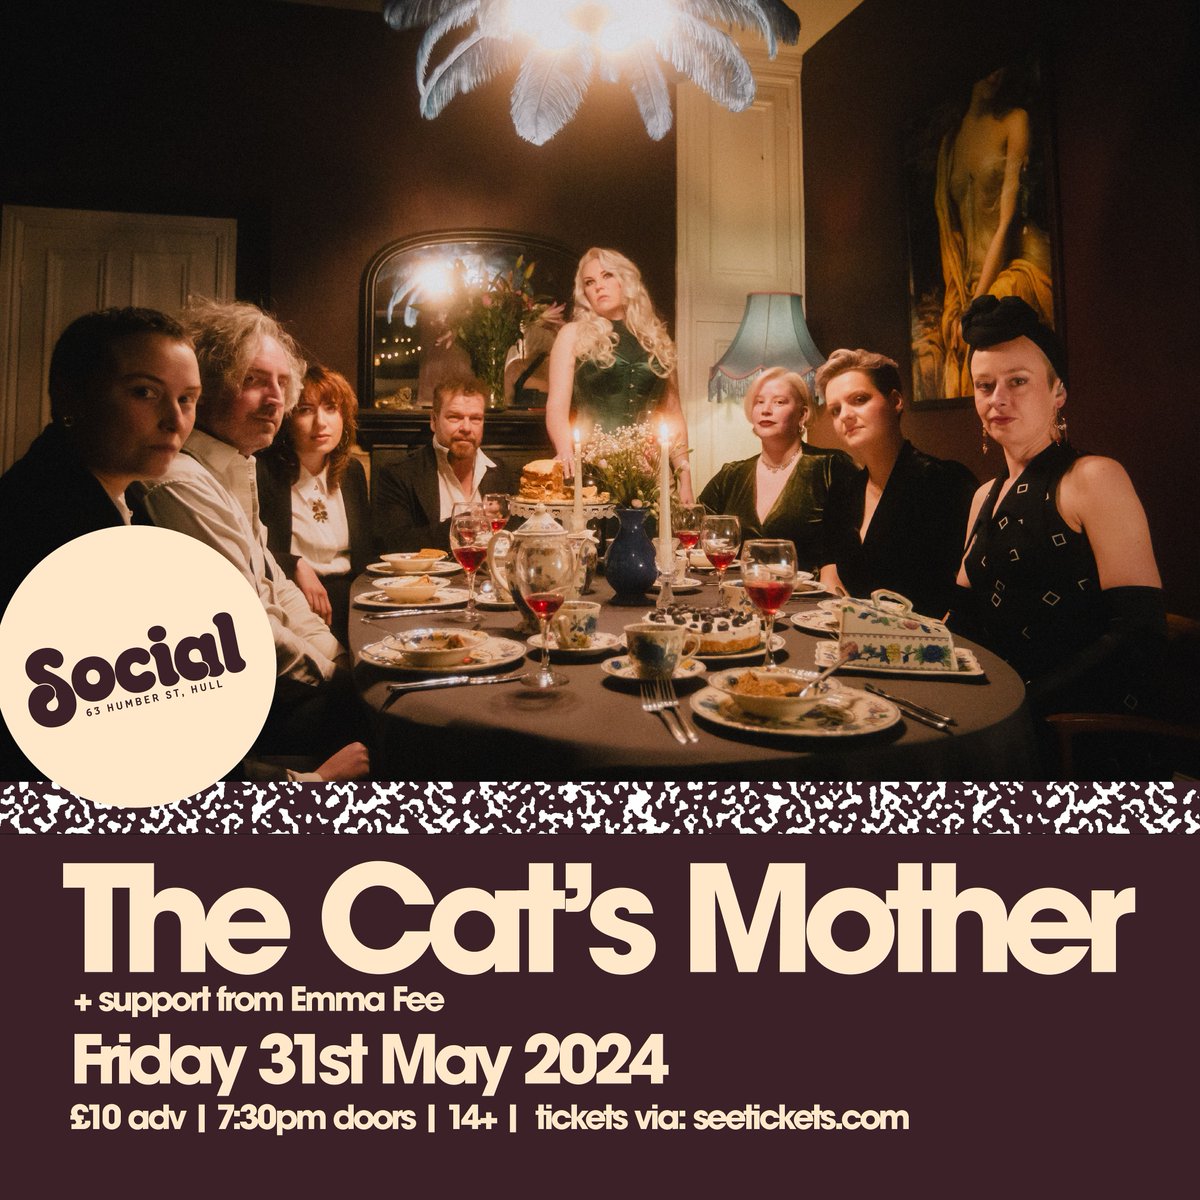 THE CAT'S MOTHER joins us at the end of the month - an eclectic 8-piece of Hull-based seasoned musicians unveiling tracks from their forthcoming album “Doing As You’re Told”. 🎟 book tickets: bit.ly/TheCatsMotherH…